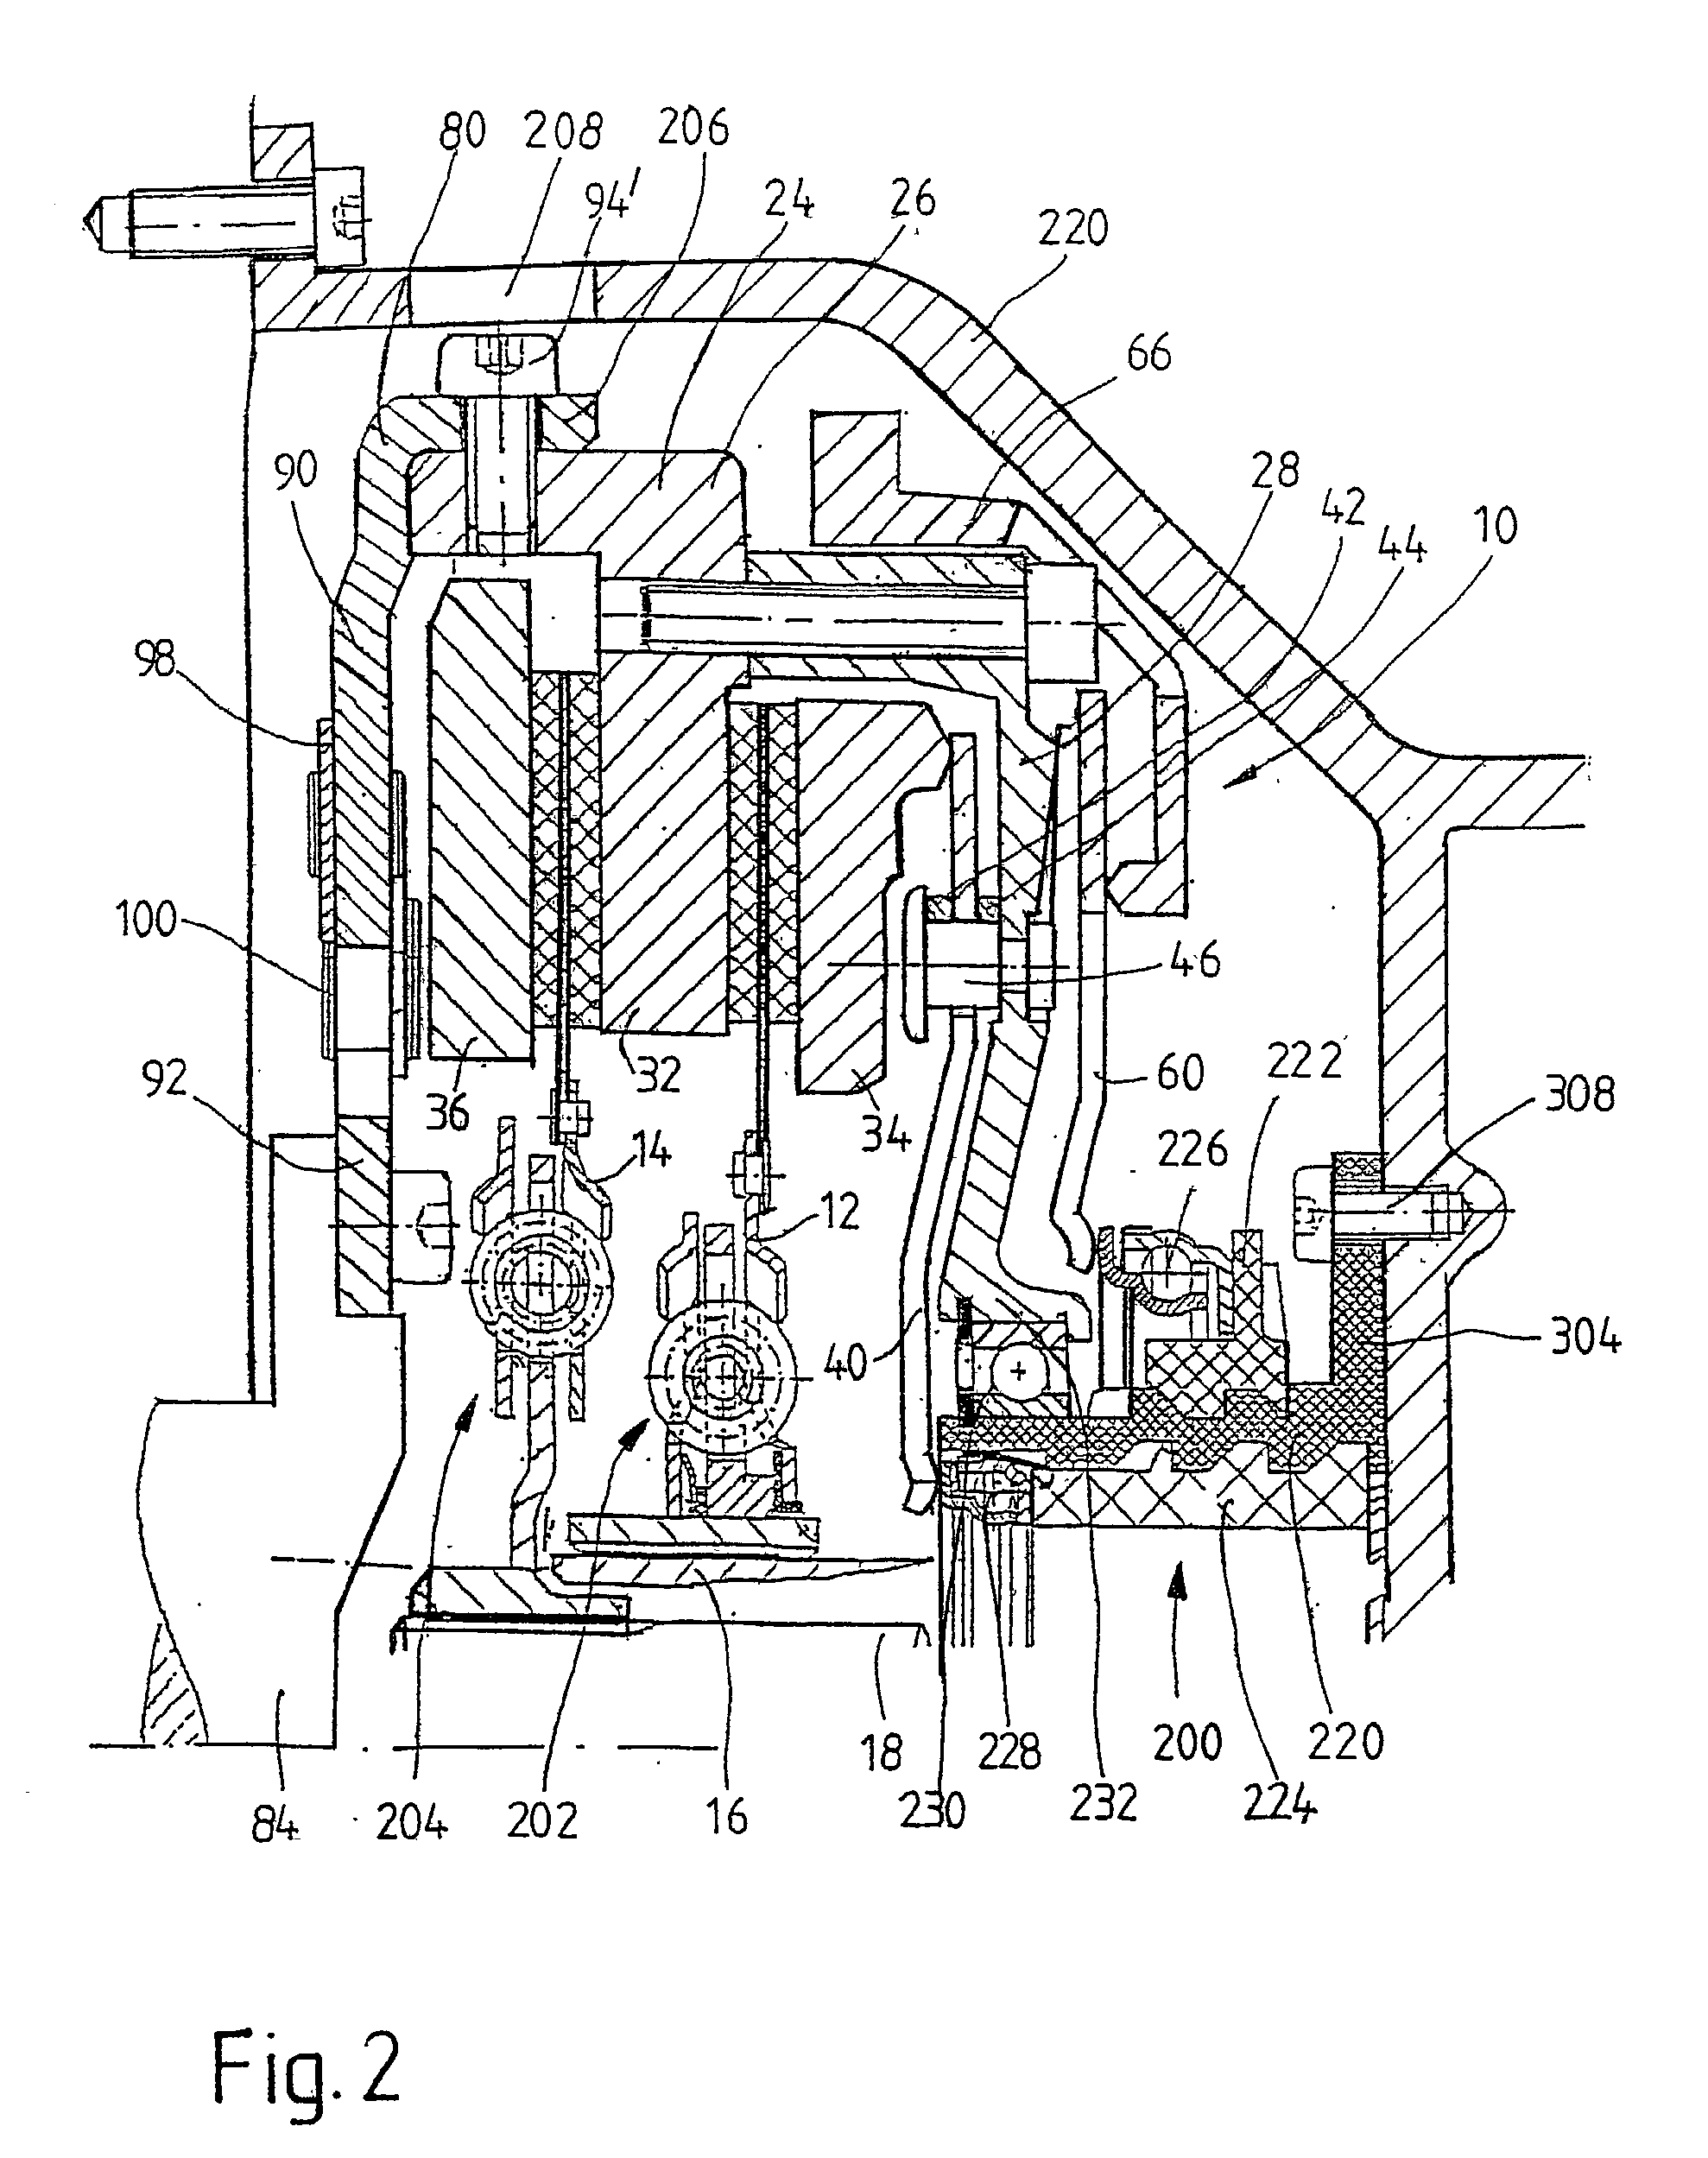 Actuating device for a friction clutch device, possibly a dual or multiple friction clutch device